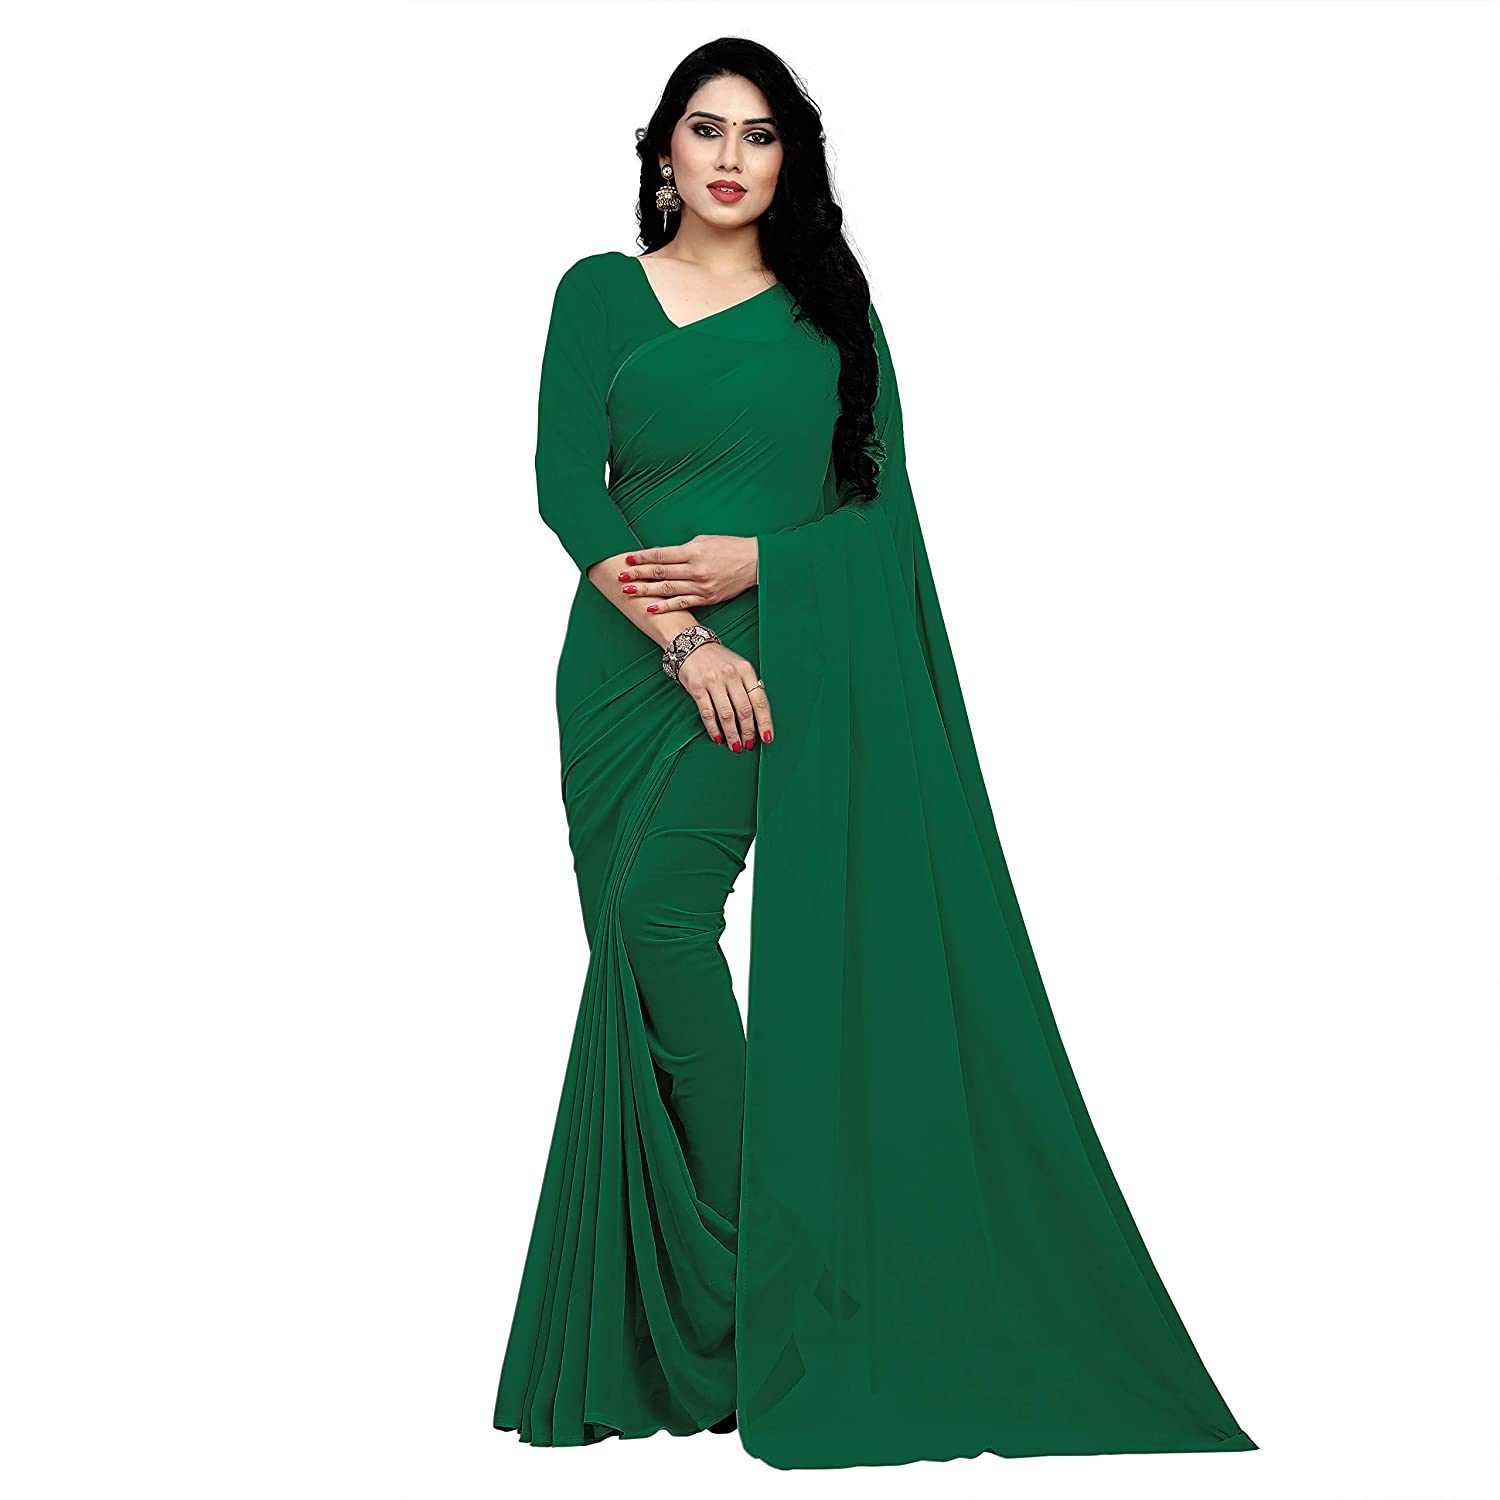 Women's Plain Woven Daily Wear  Formal Georgette Sari With Blouse Piece (Bottle Green) - NIMIDHYA